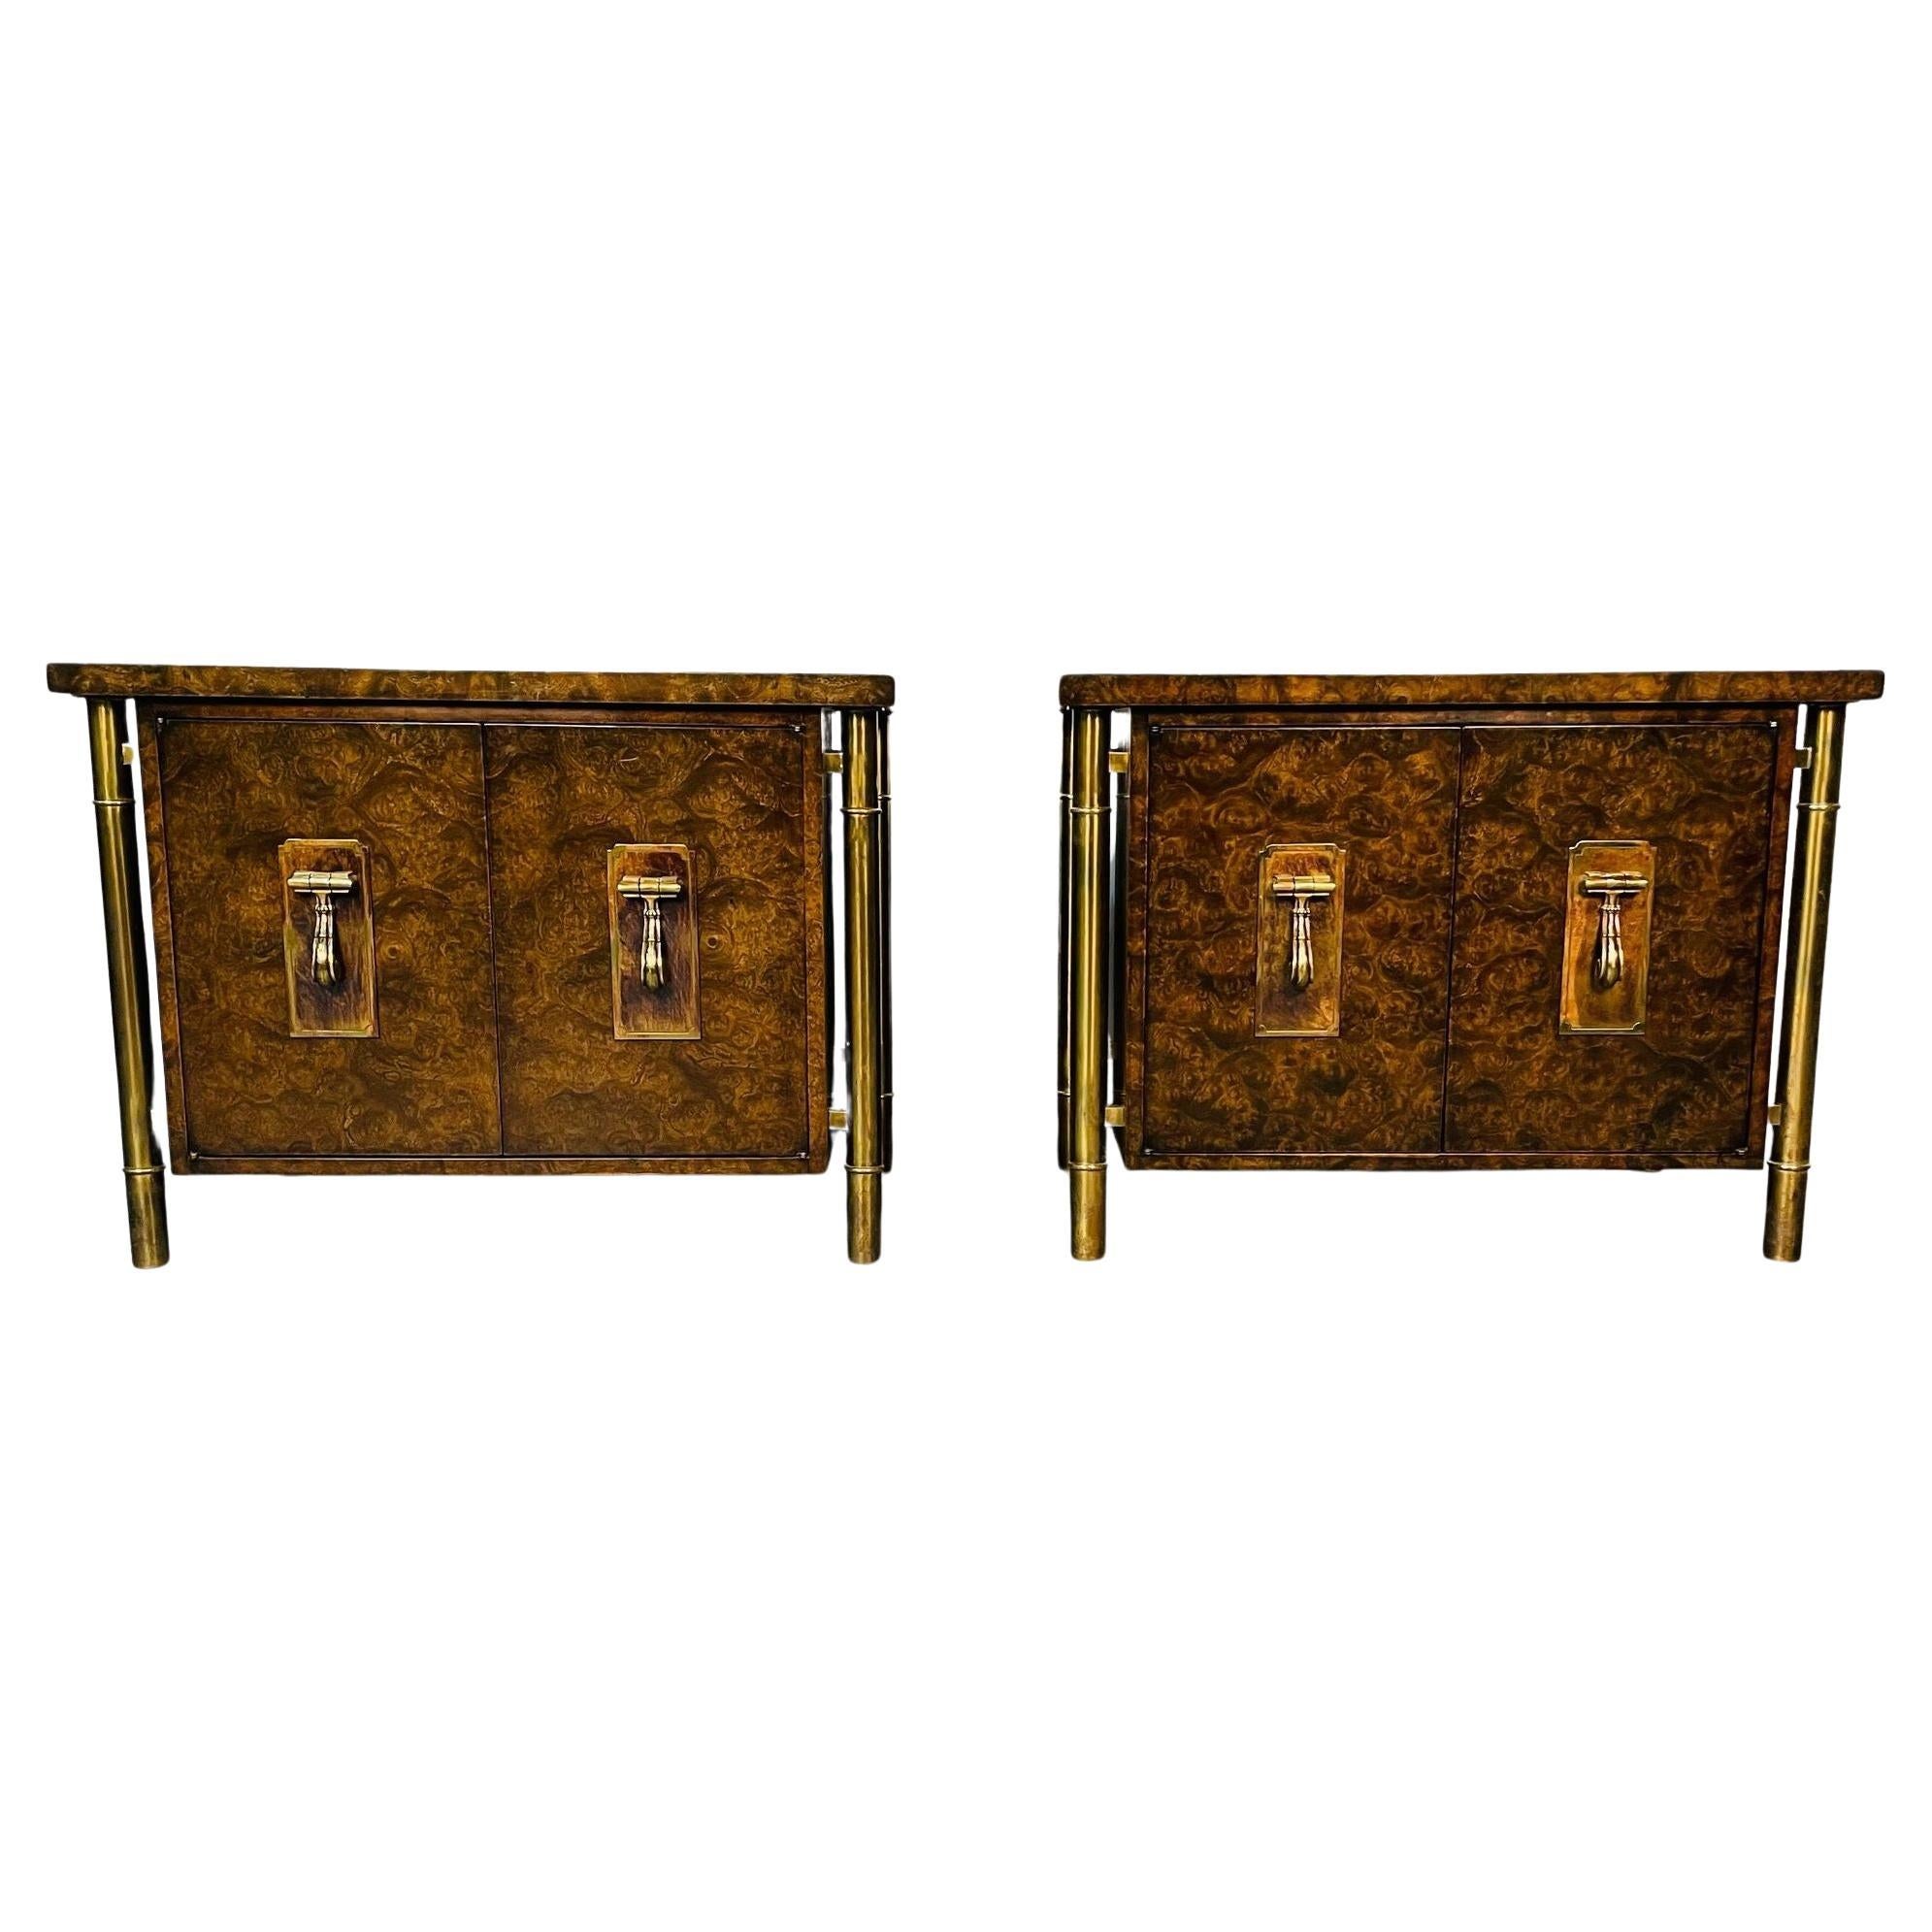 Pair Mid-Century Modern Mastercraft Nightstands, Floating Cabinets in Elm, Brass For Sale